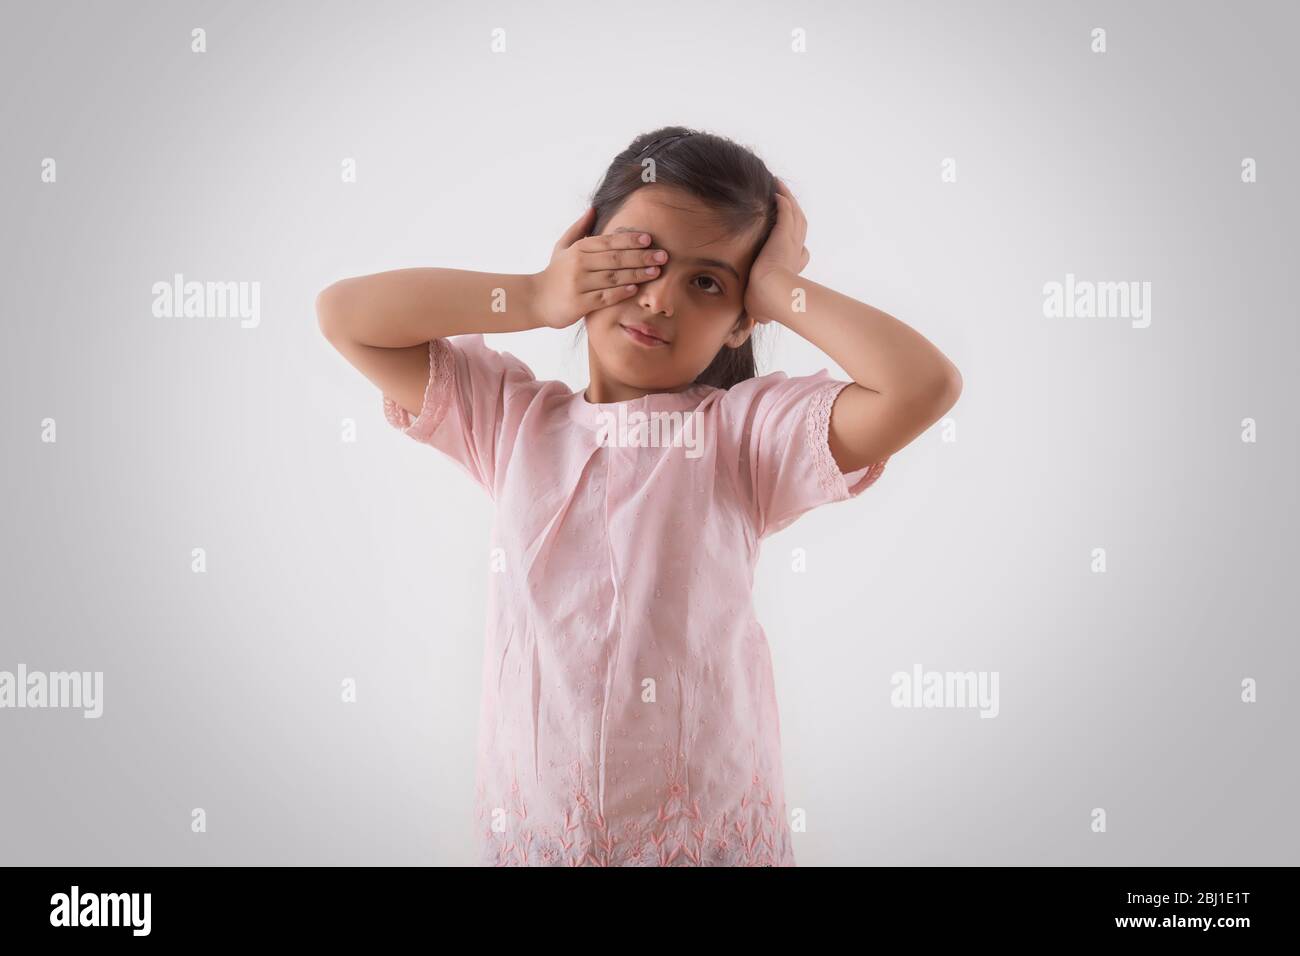 portrait of a young girl rubbing her eyes Stock Photo